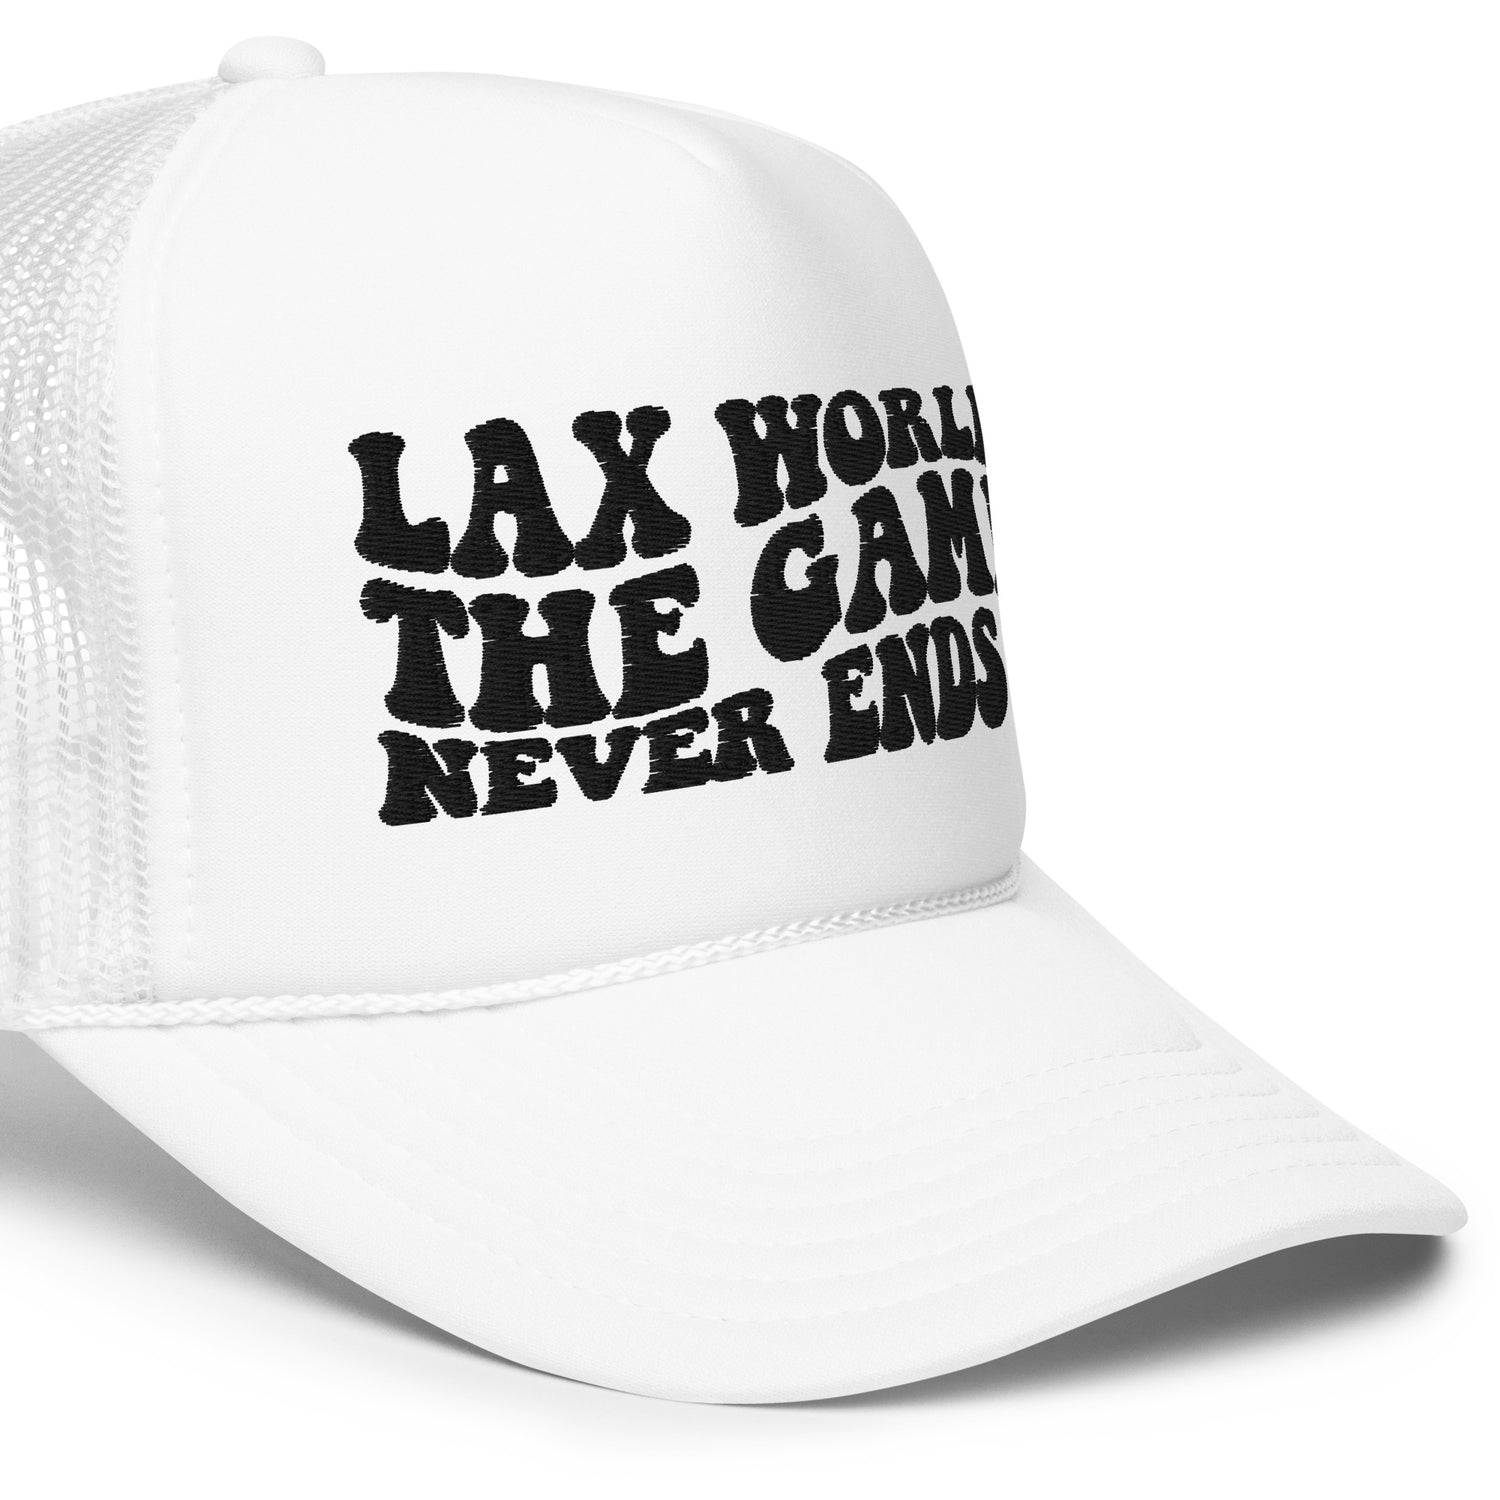 The Game Never Ends… Trucker Hat